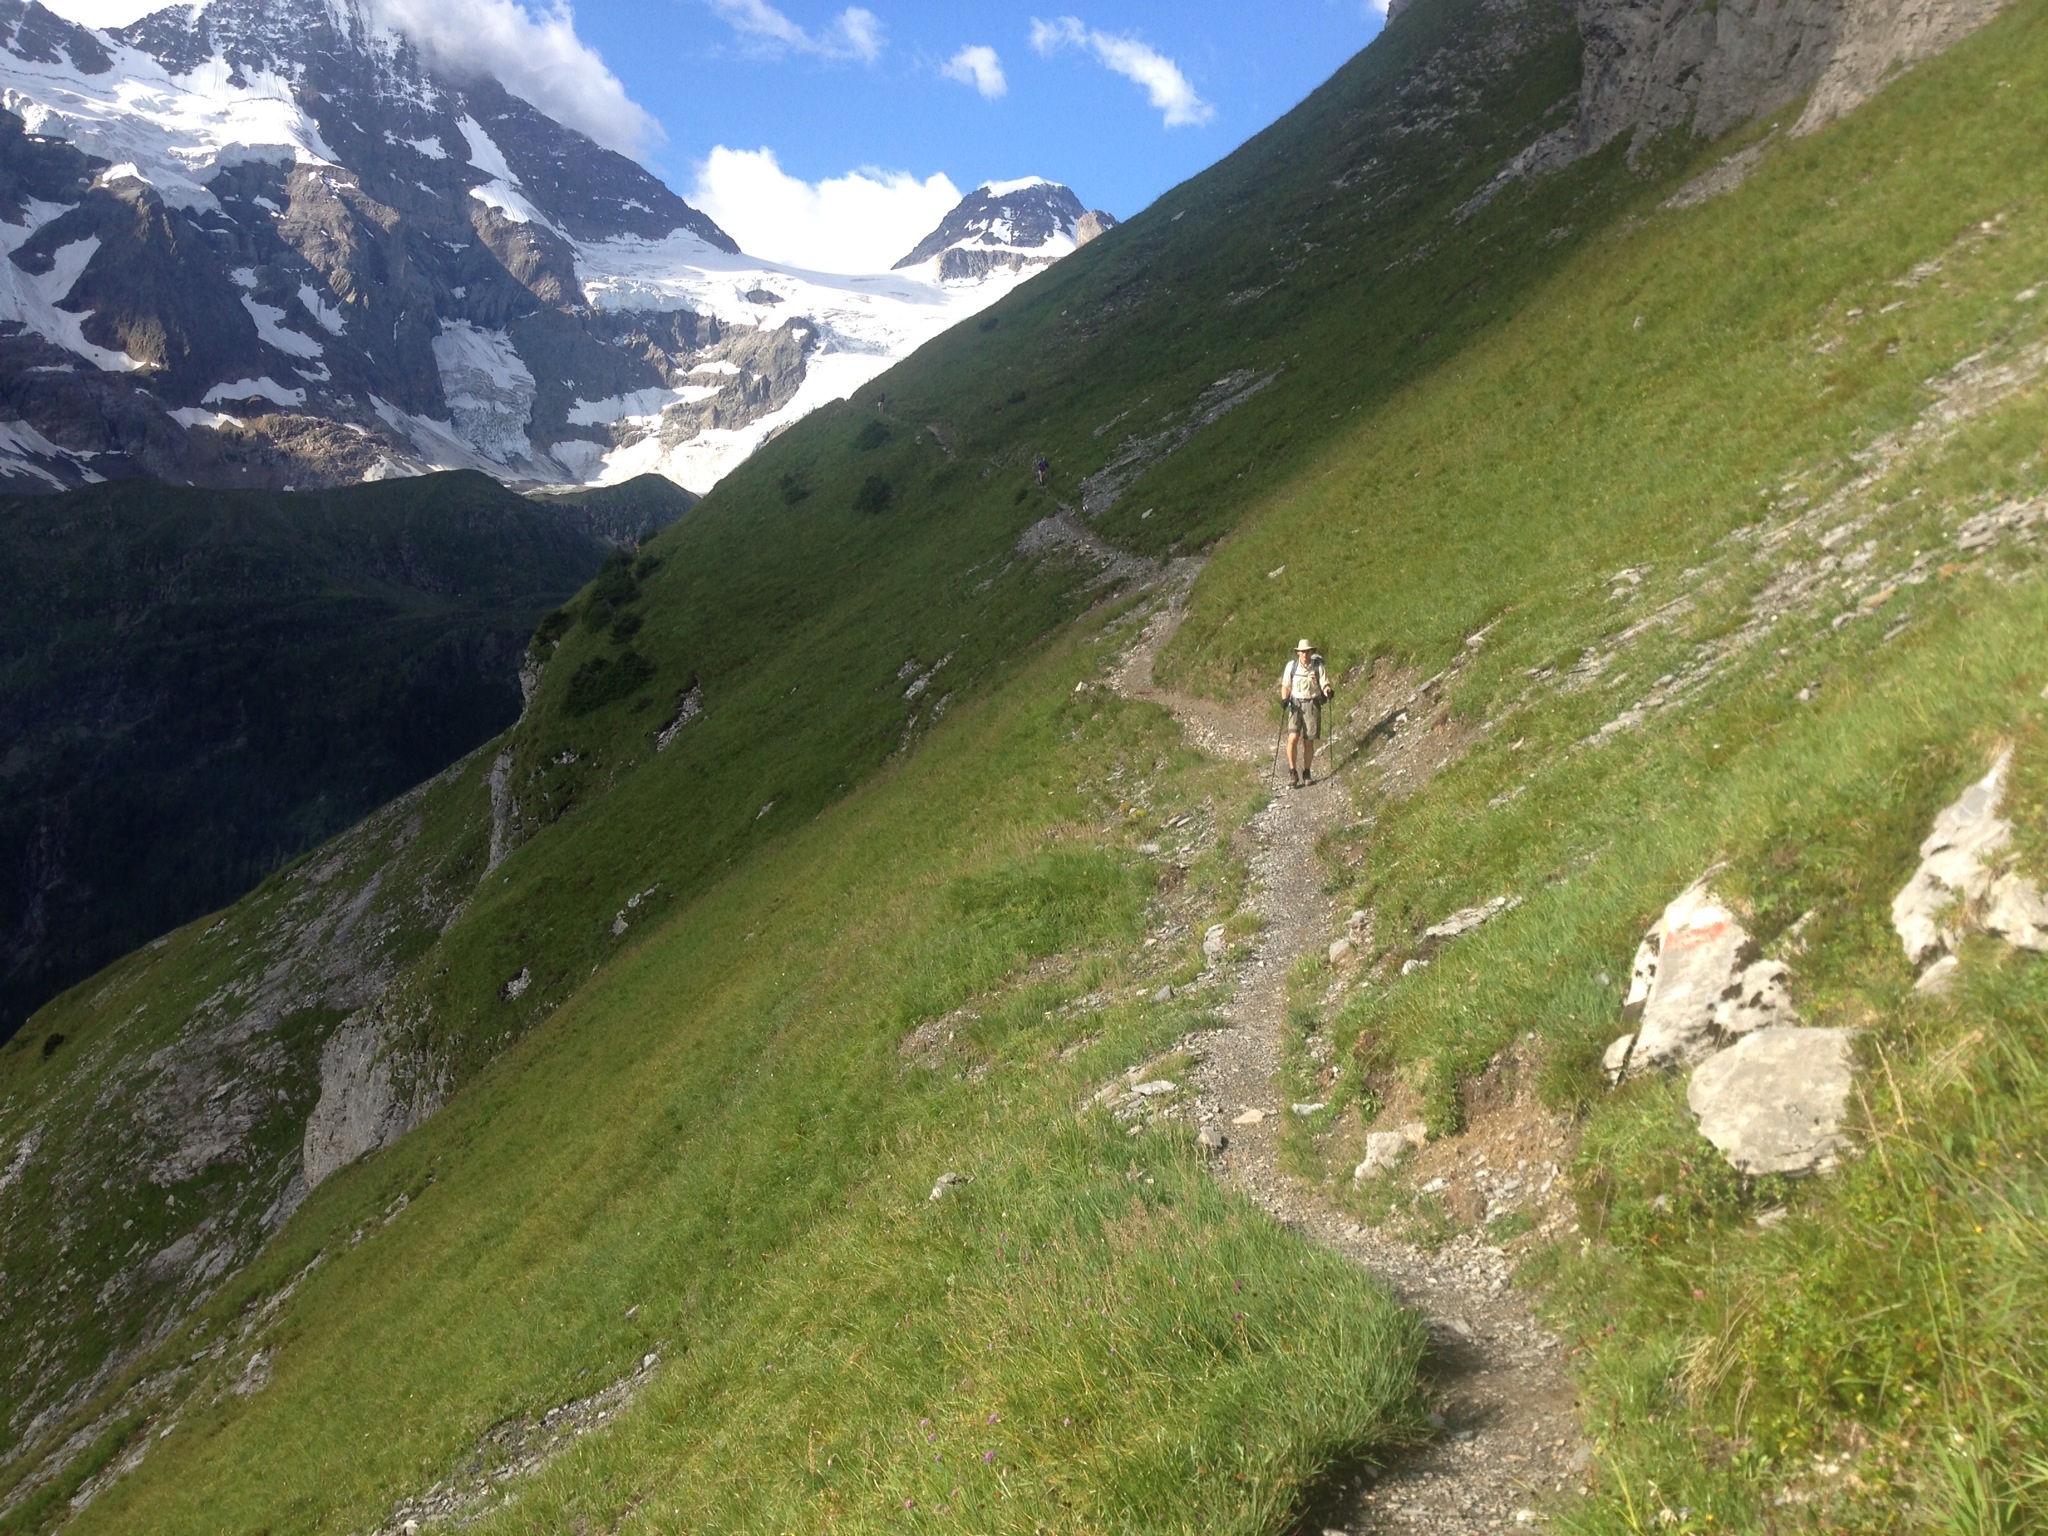 Hiking out of the upper Lauterbrunnen valley